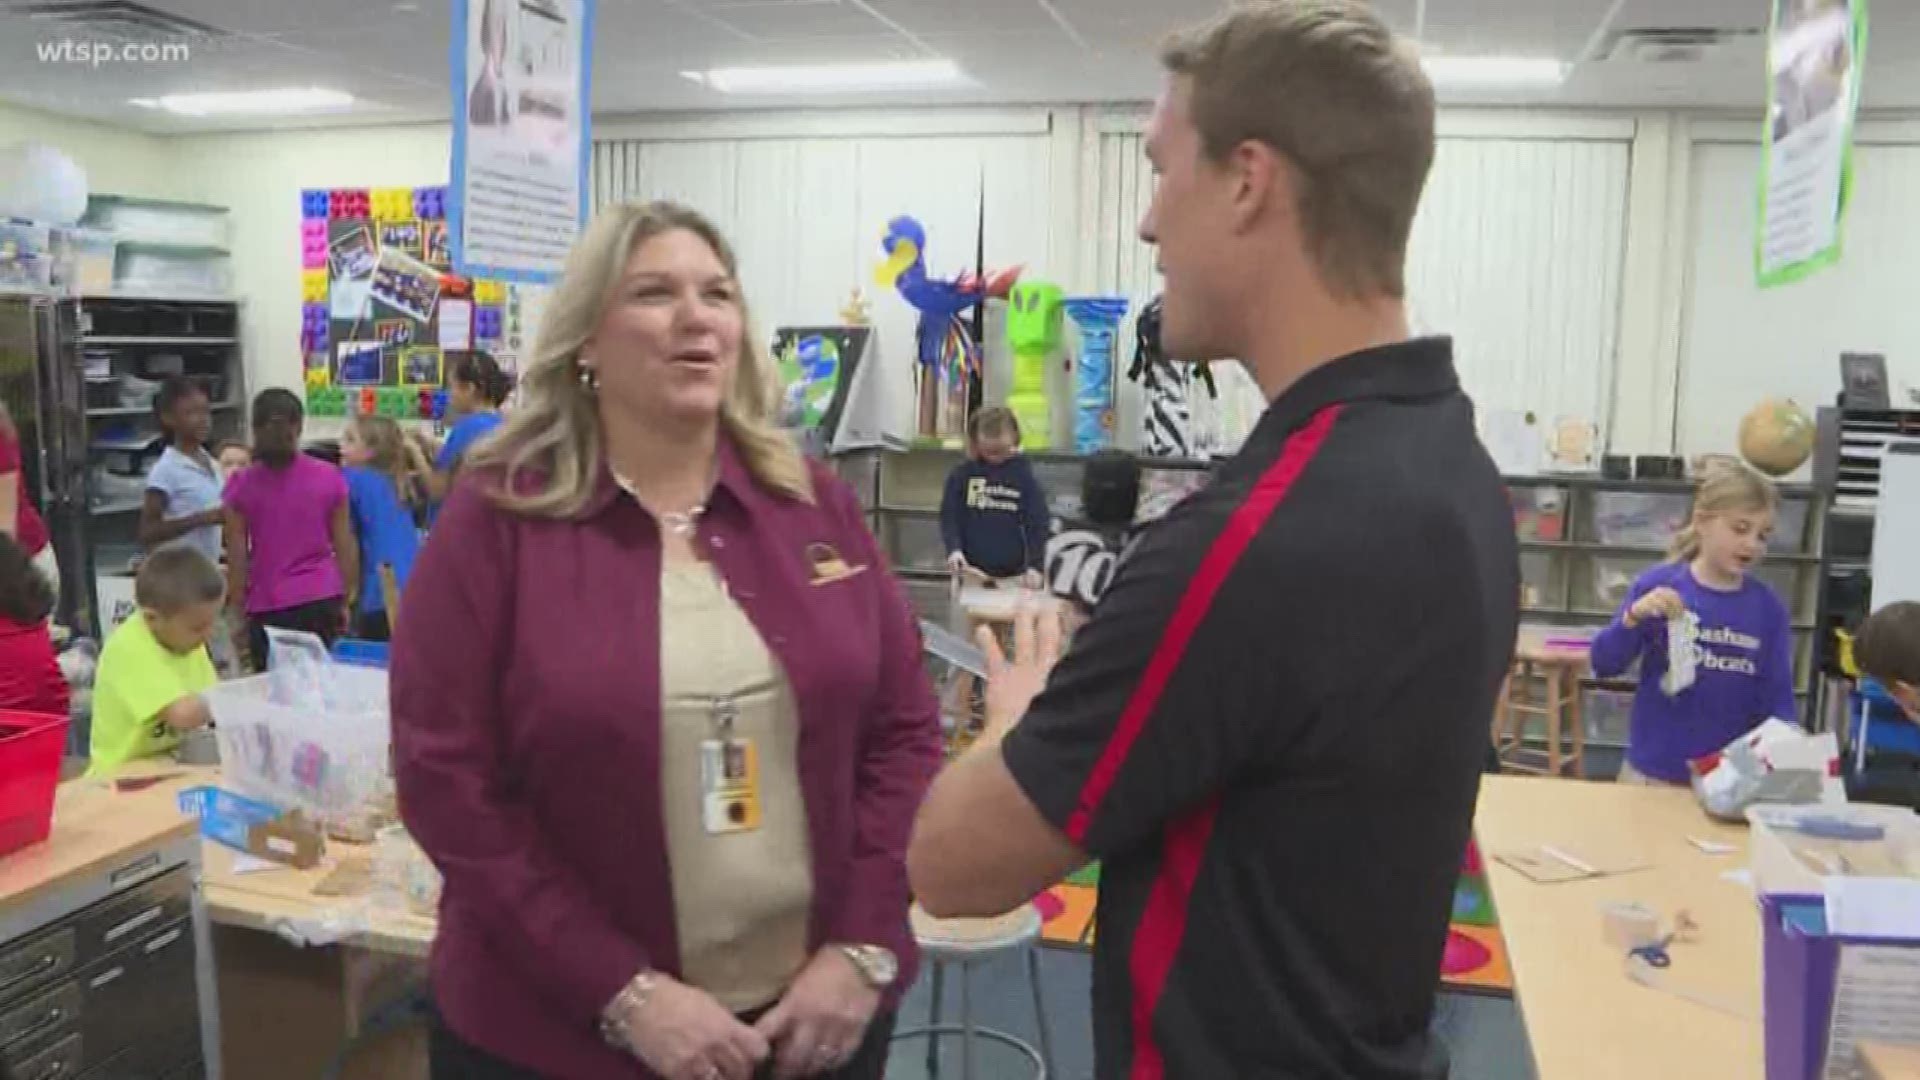 Bashaw Elementary Vice Principal Beth Marshall speaks on being named the 10news School of the Week powered by Duke Energy Florida.